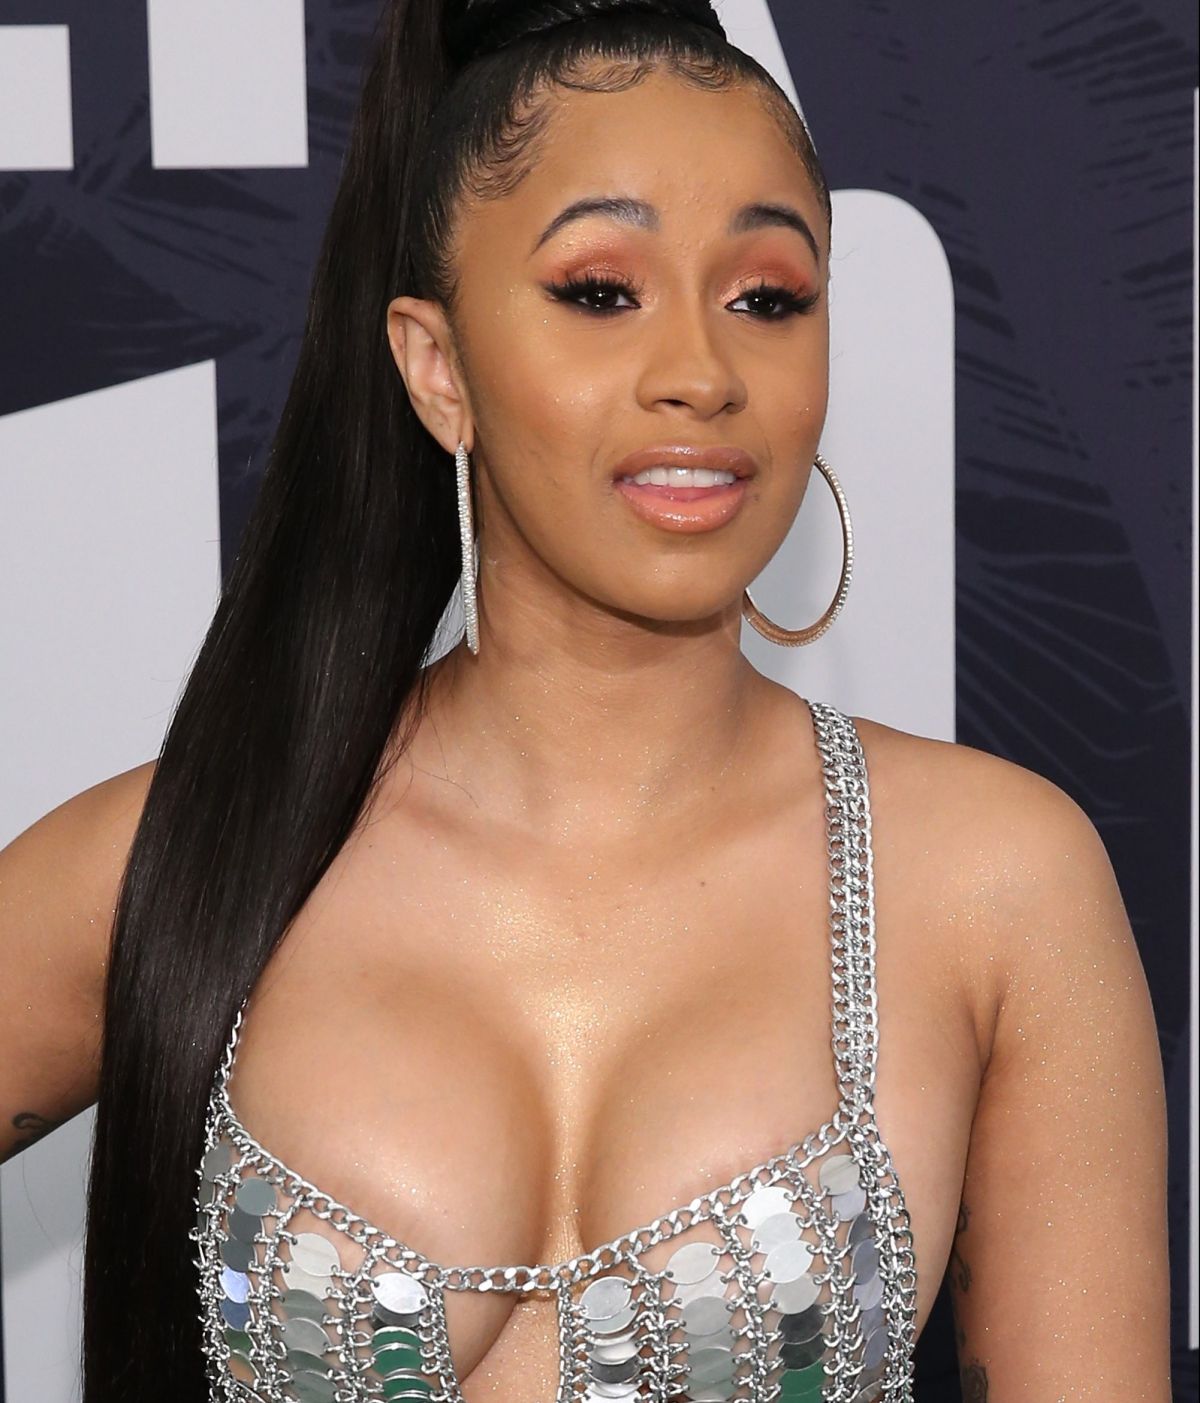 Cardi B arrived with a tremendous cleavage to the classroom of a preschool to teach History!